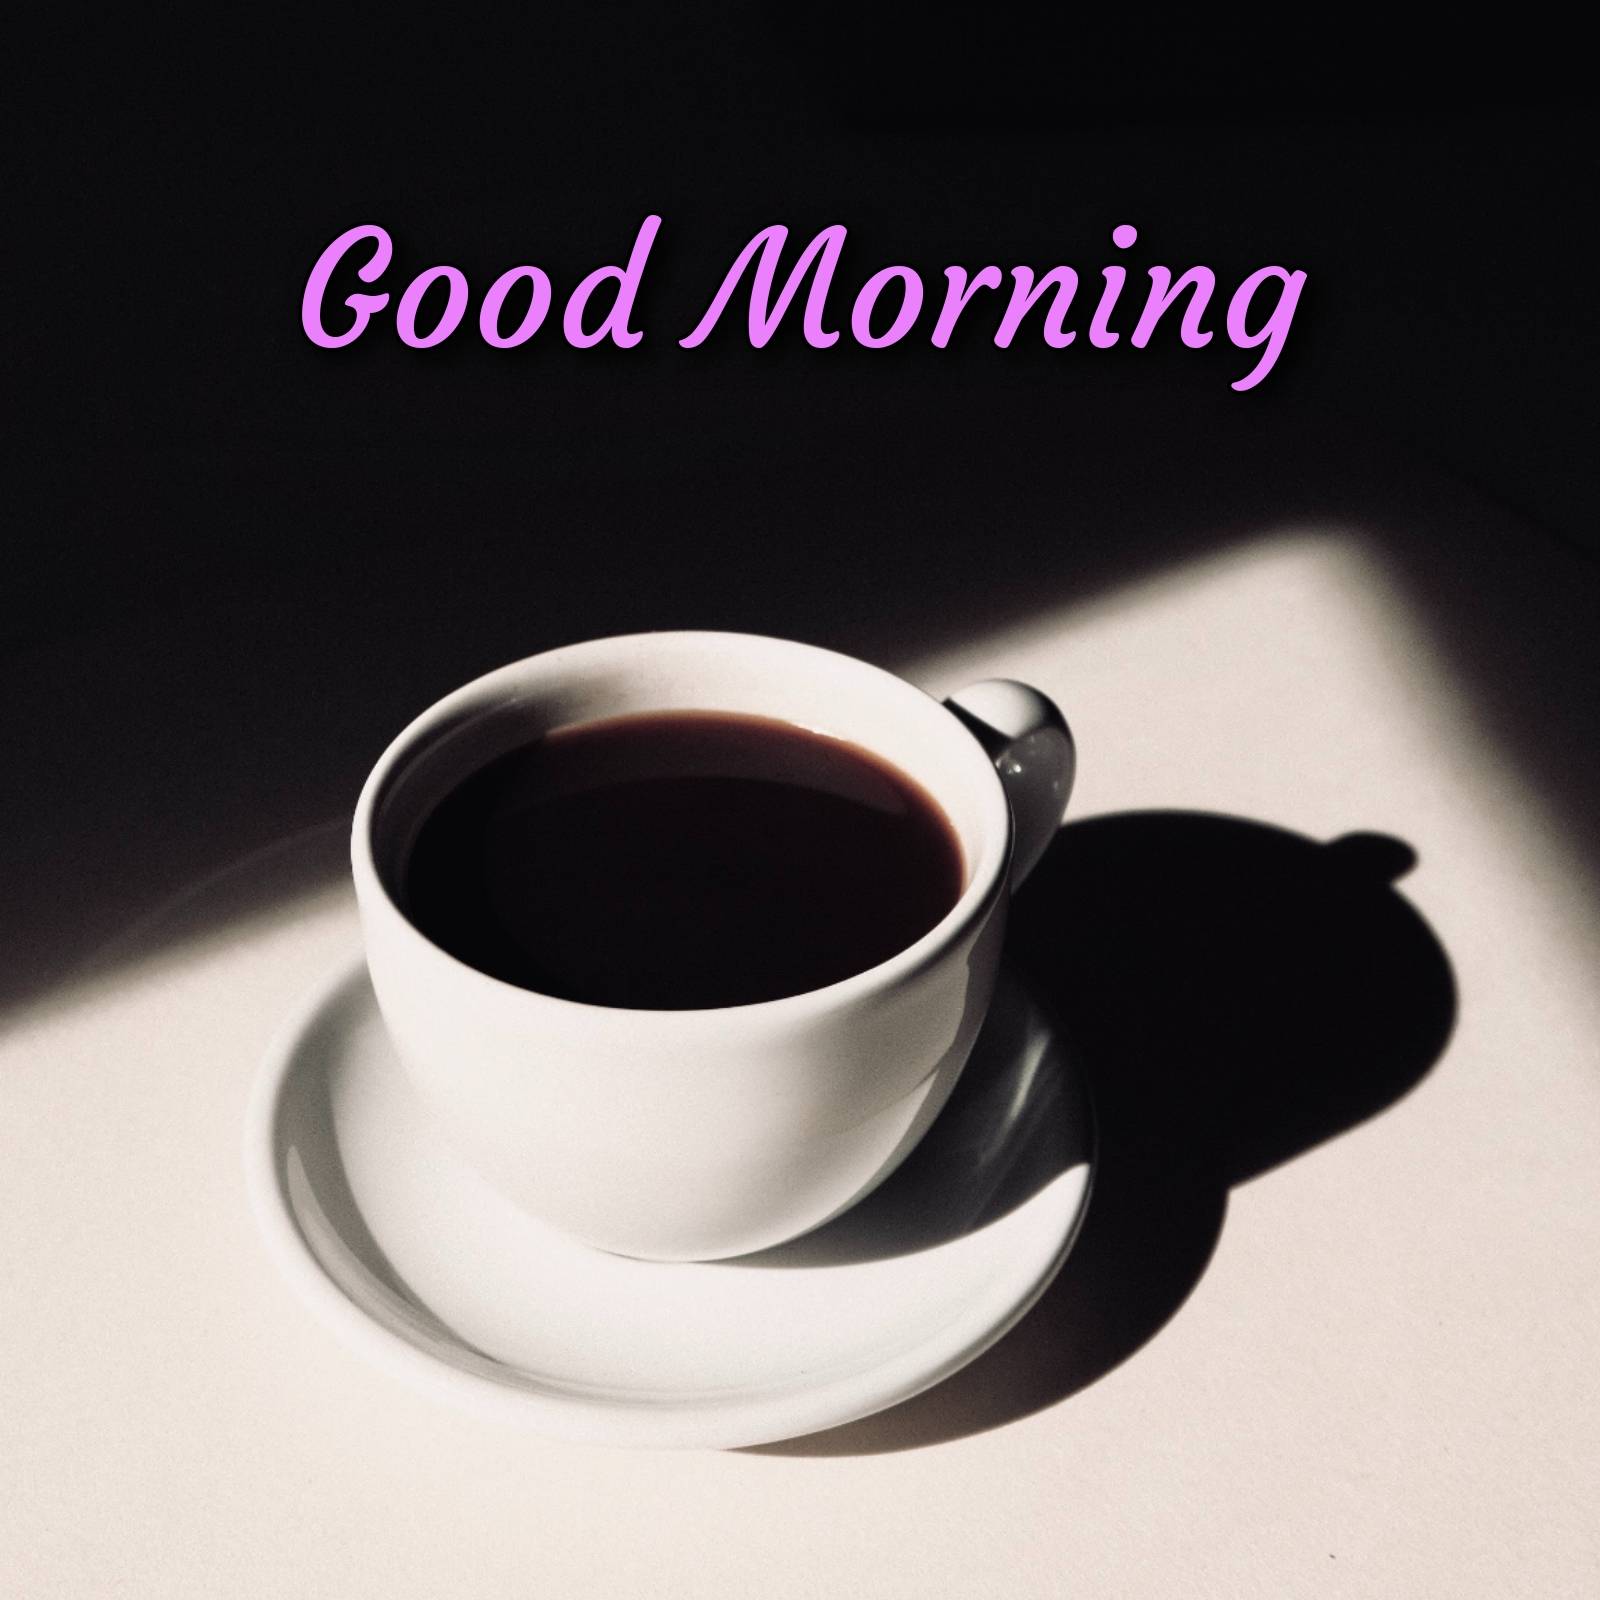 Good Morning Coffee Cup Images Download